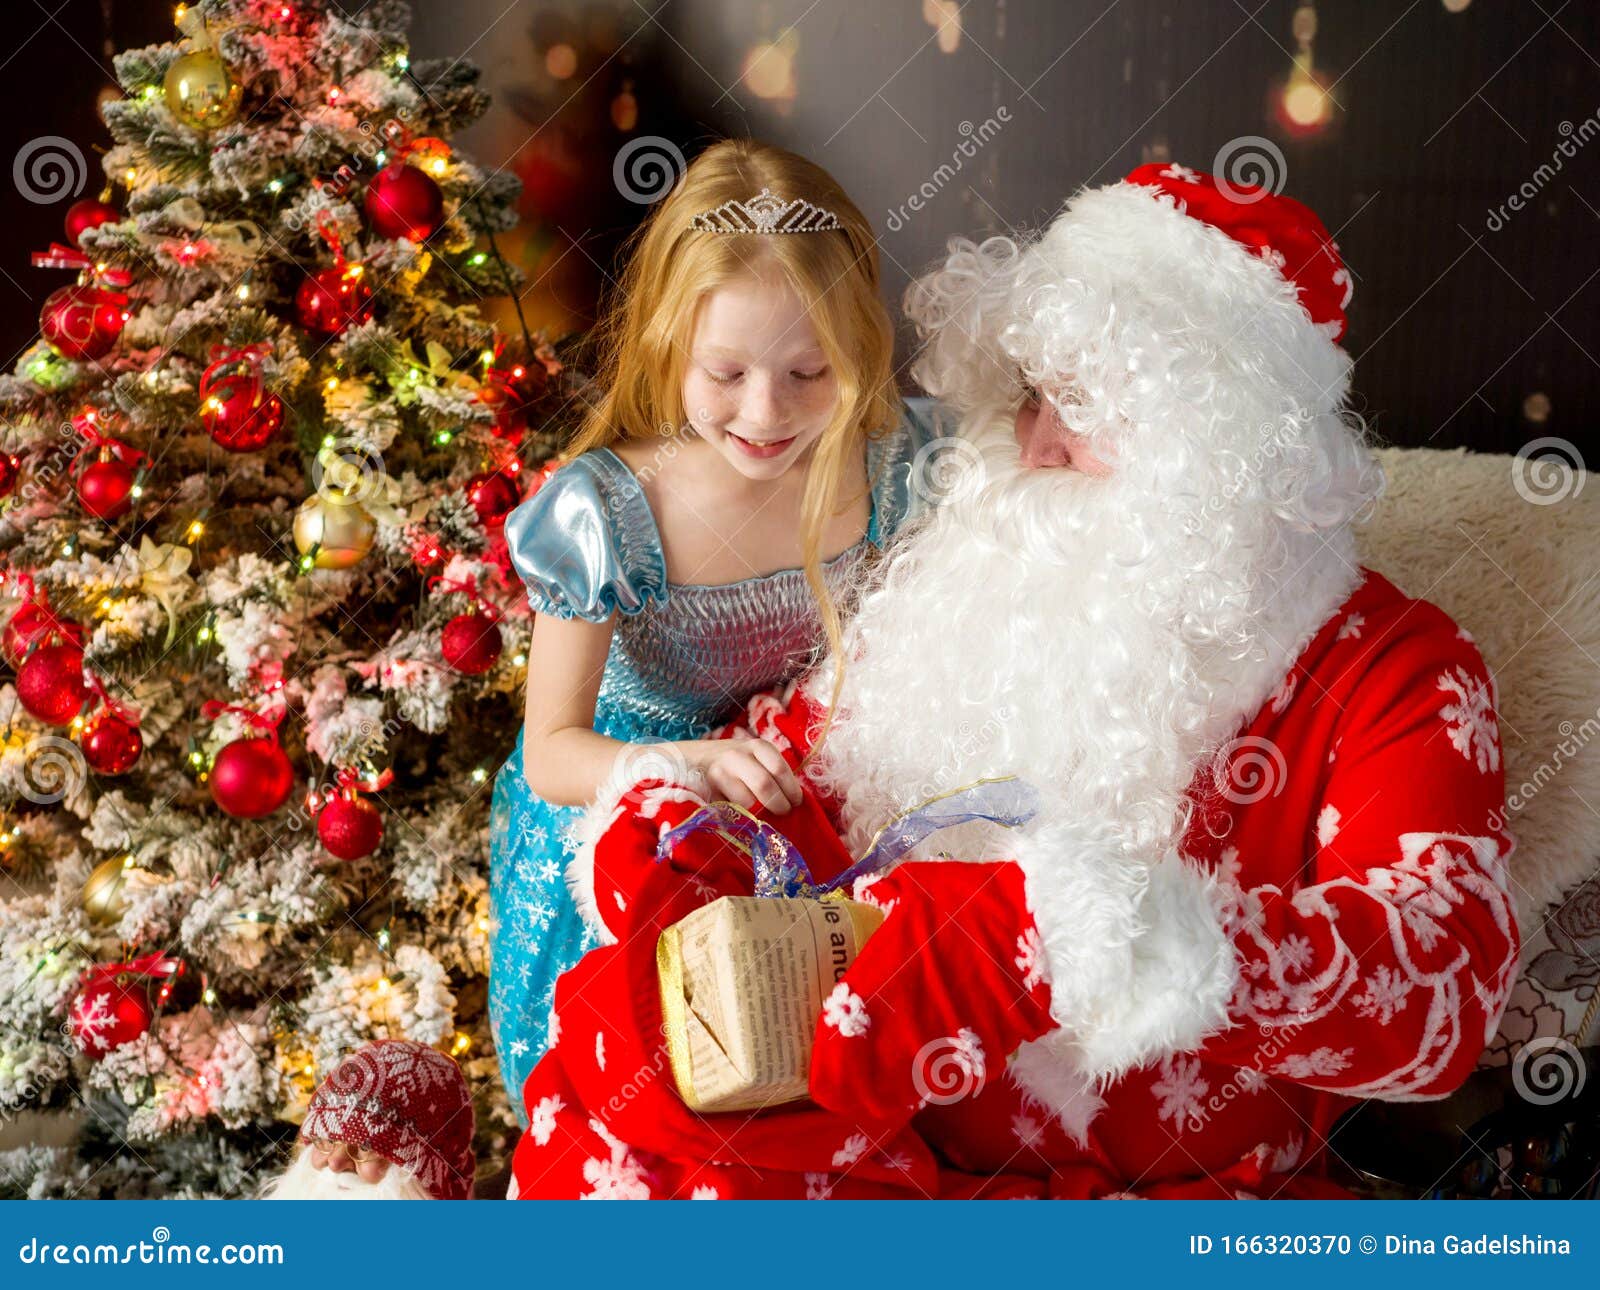 Santa Claus And Beautiful Girl With New Year Gifts At The